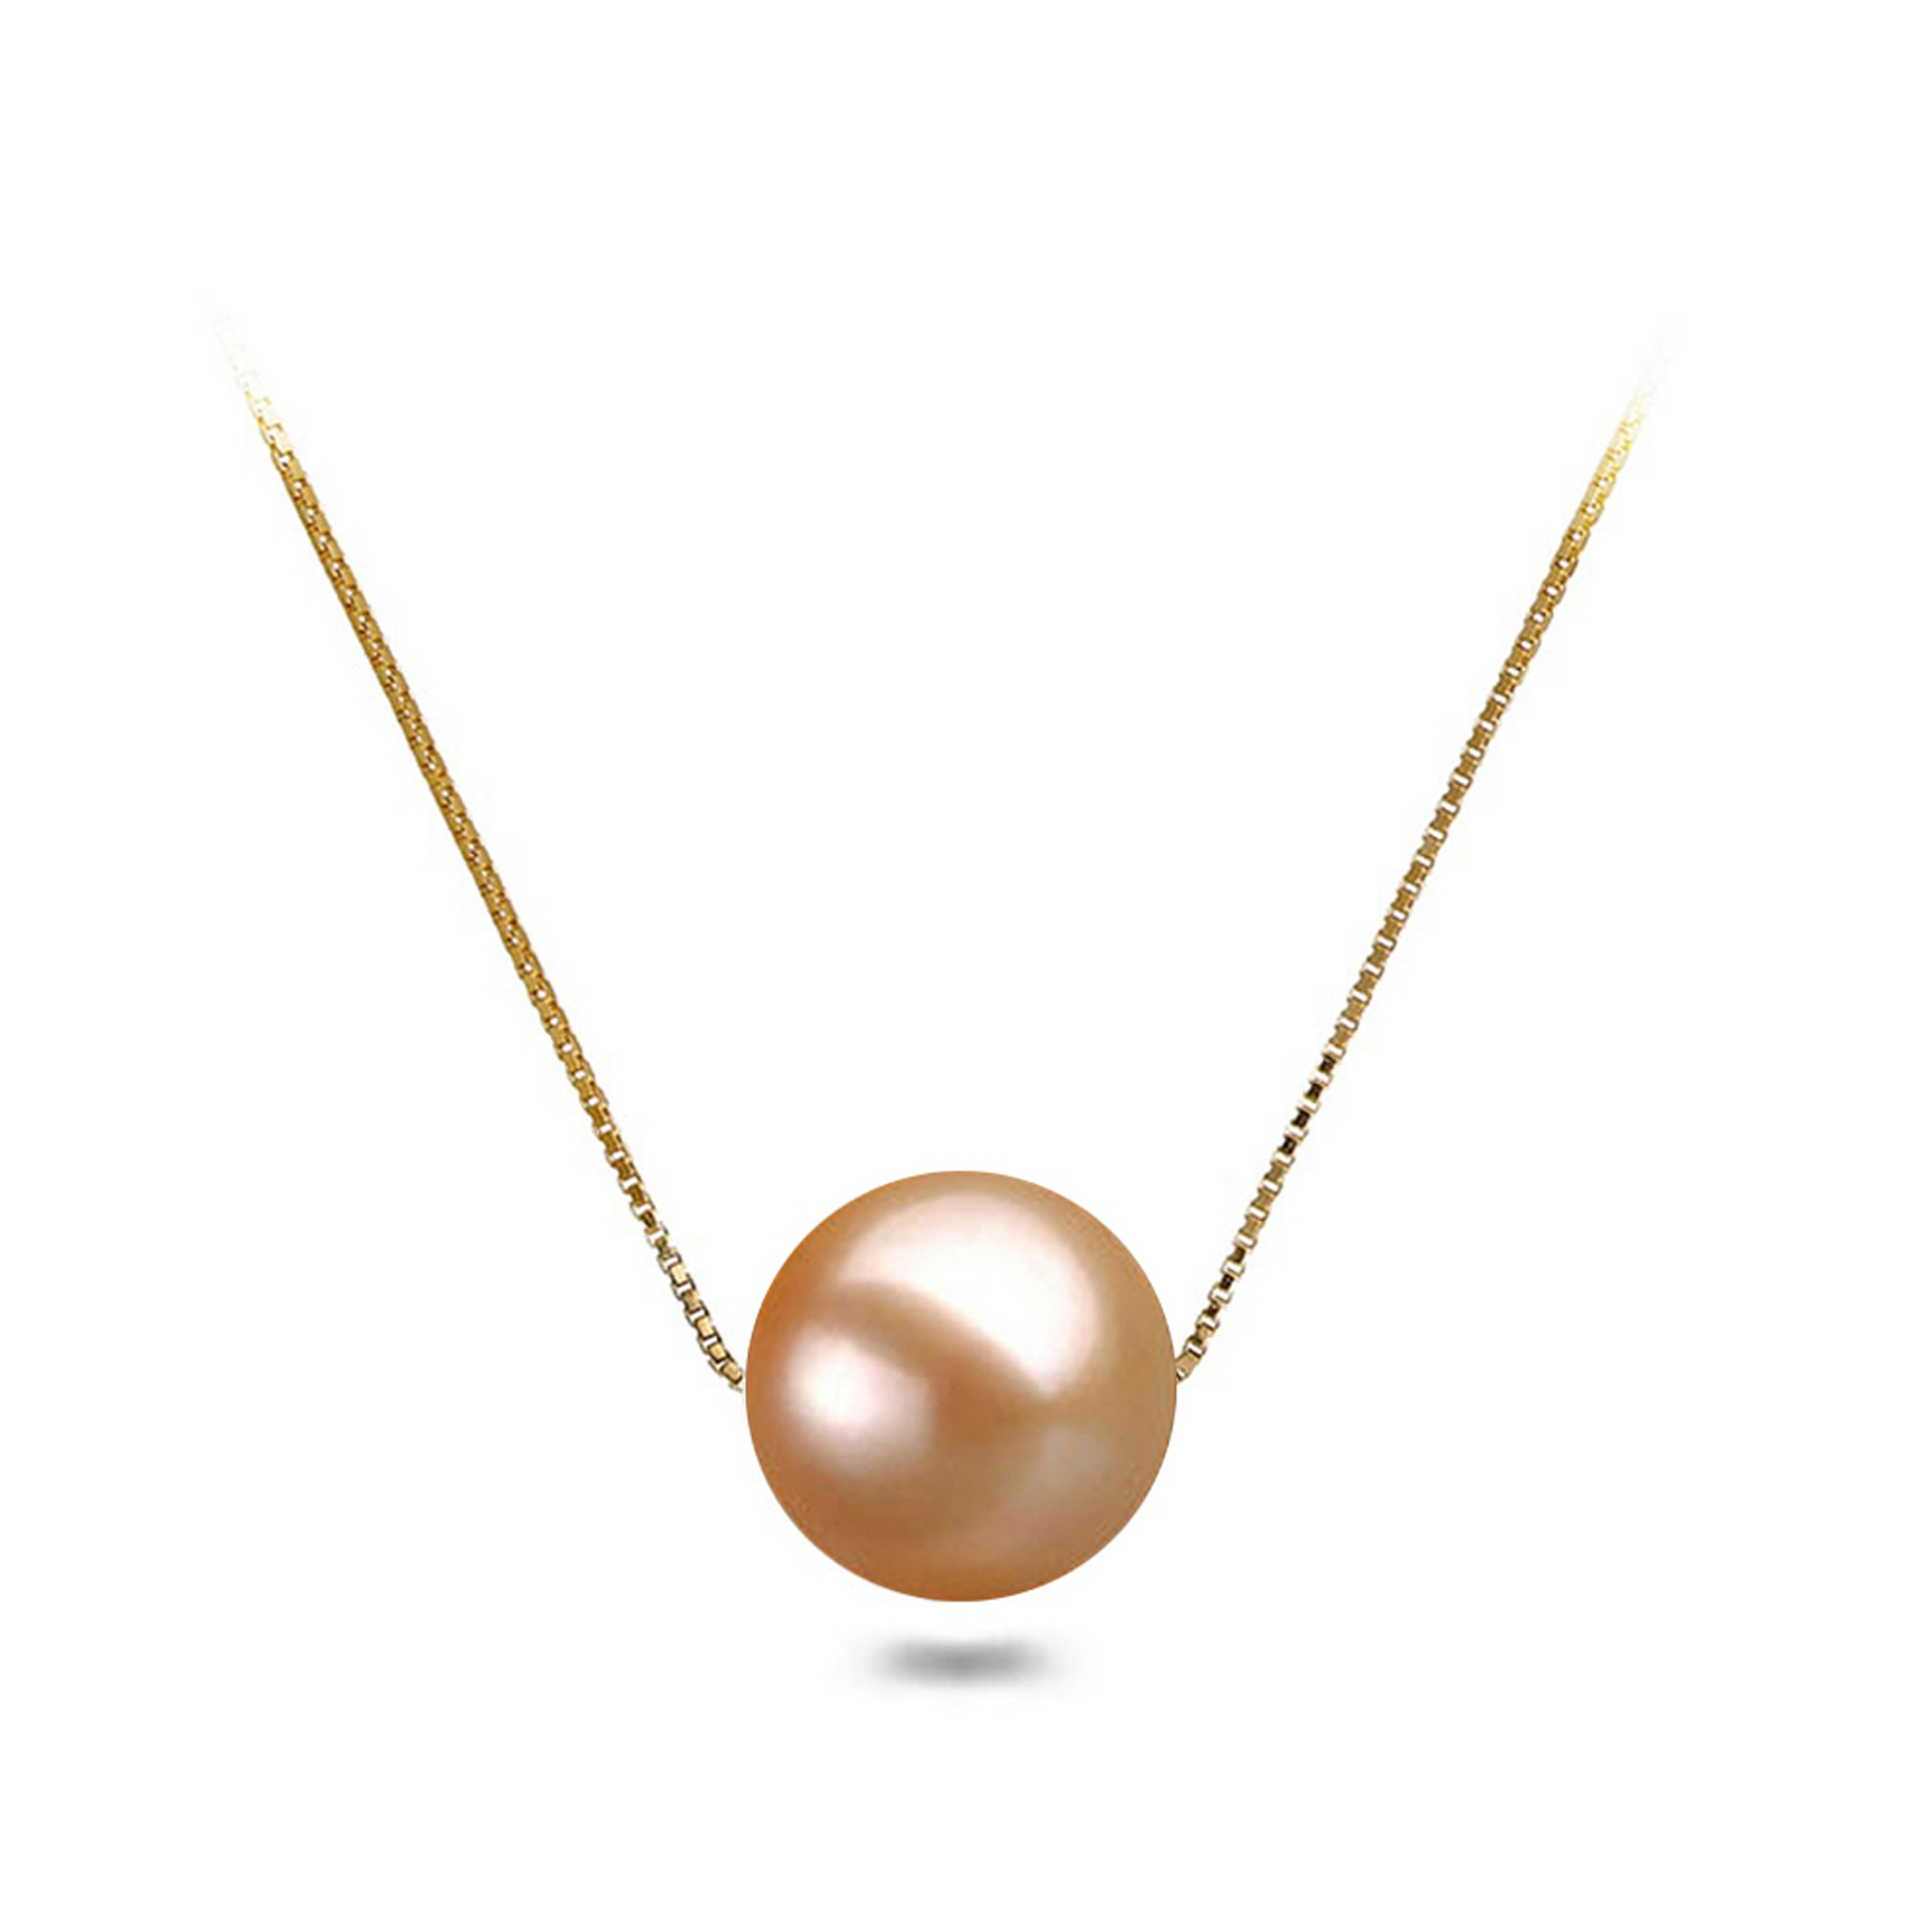 Orien Jewelry AAAA Japanese Freshwater Pearl Pendant Necklace Silver Chain Floating Pink Color Pearl Necklace Pendant Jewelry Set